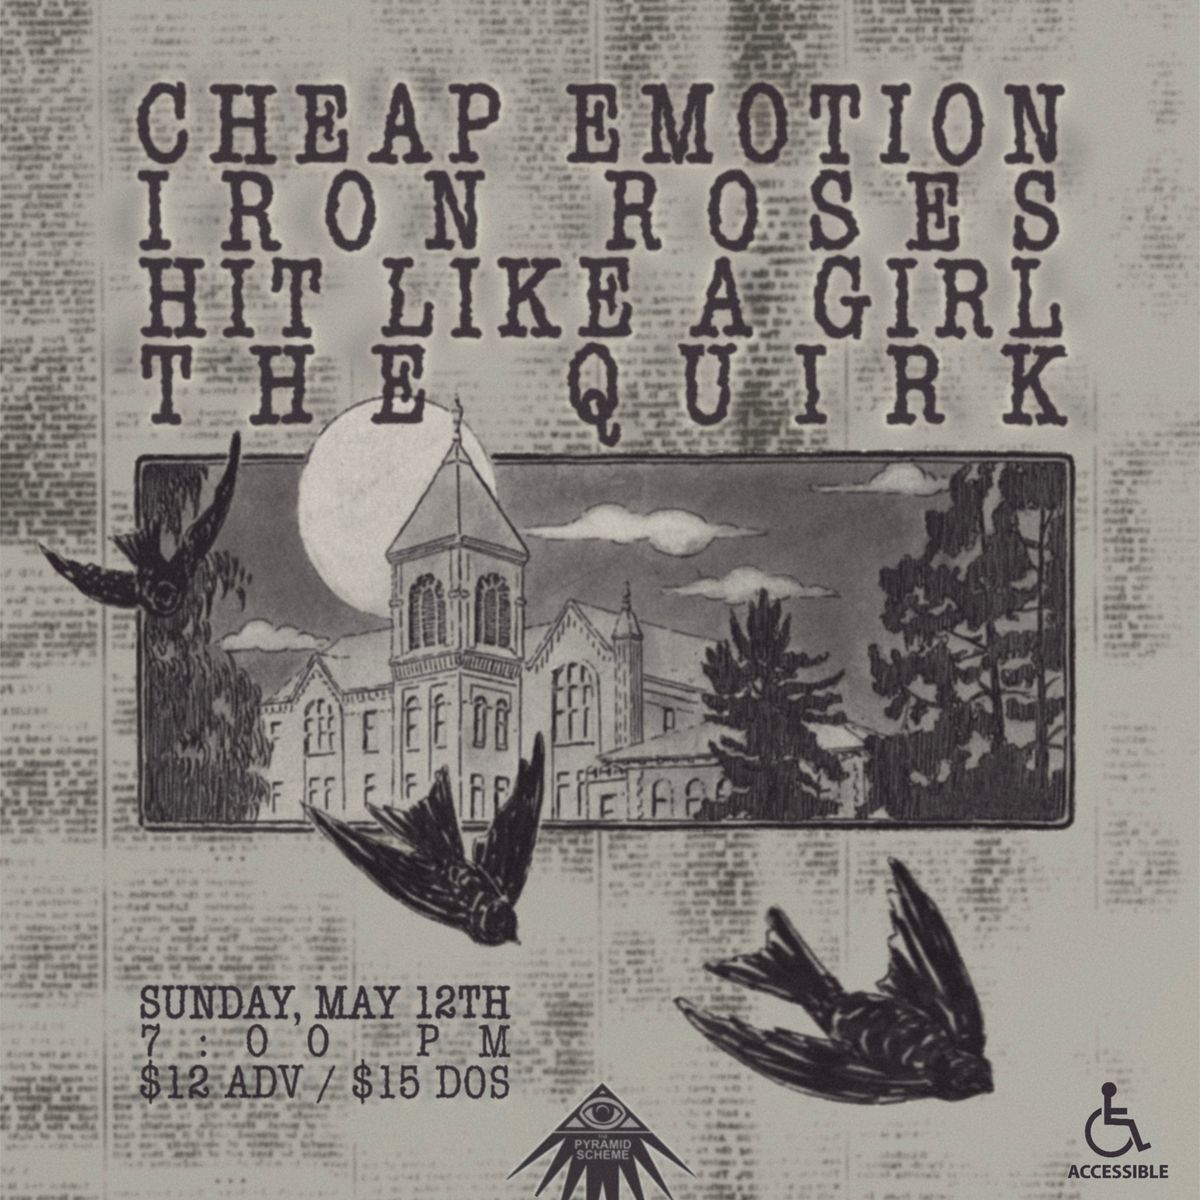 Cheap Emotion + Iron Roses + Hit Like A Girl + The Quirk | Pyramid Scheme 5\/12